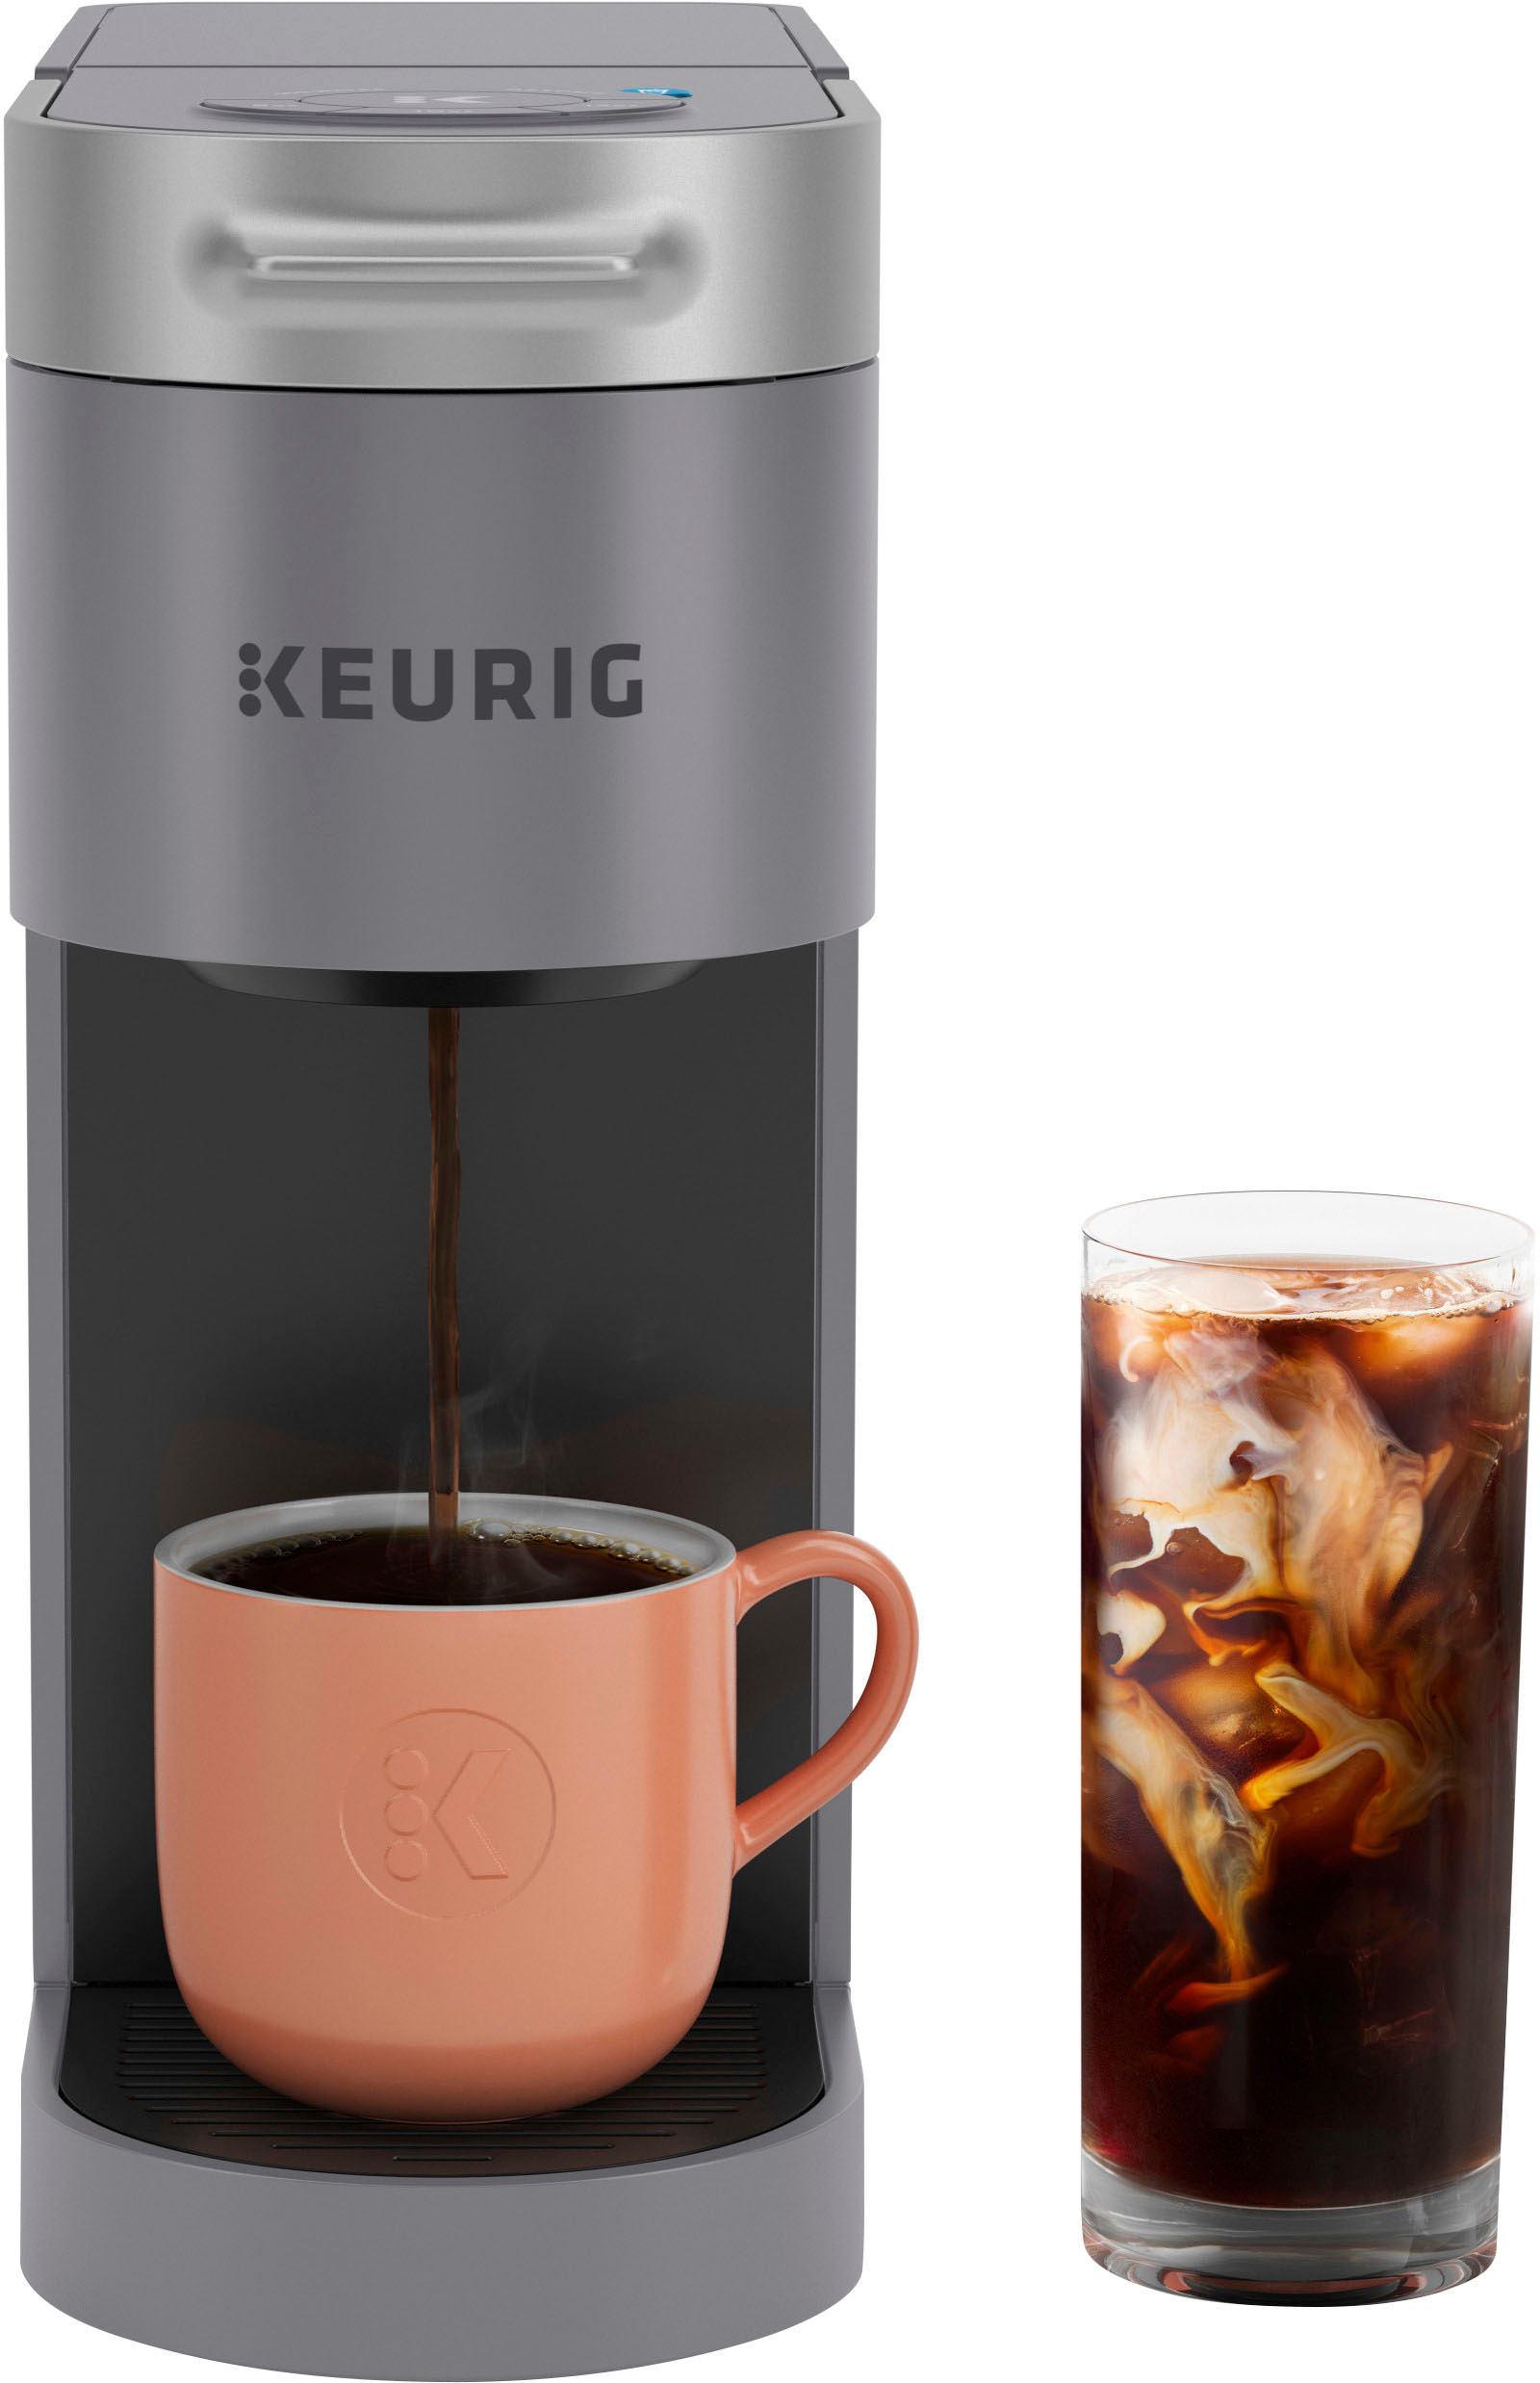 New! Keurig K-iced essentials coffee maker from Walmart. makes ICED CO, keurig iced coffee